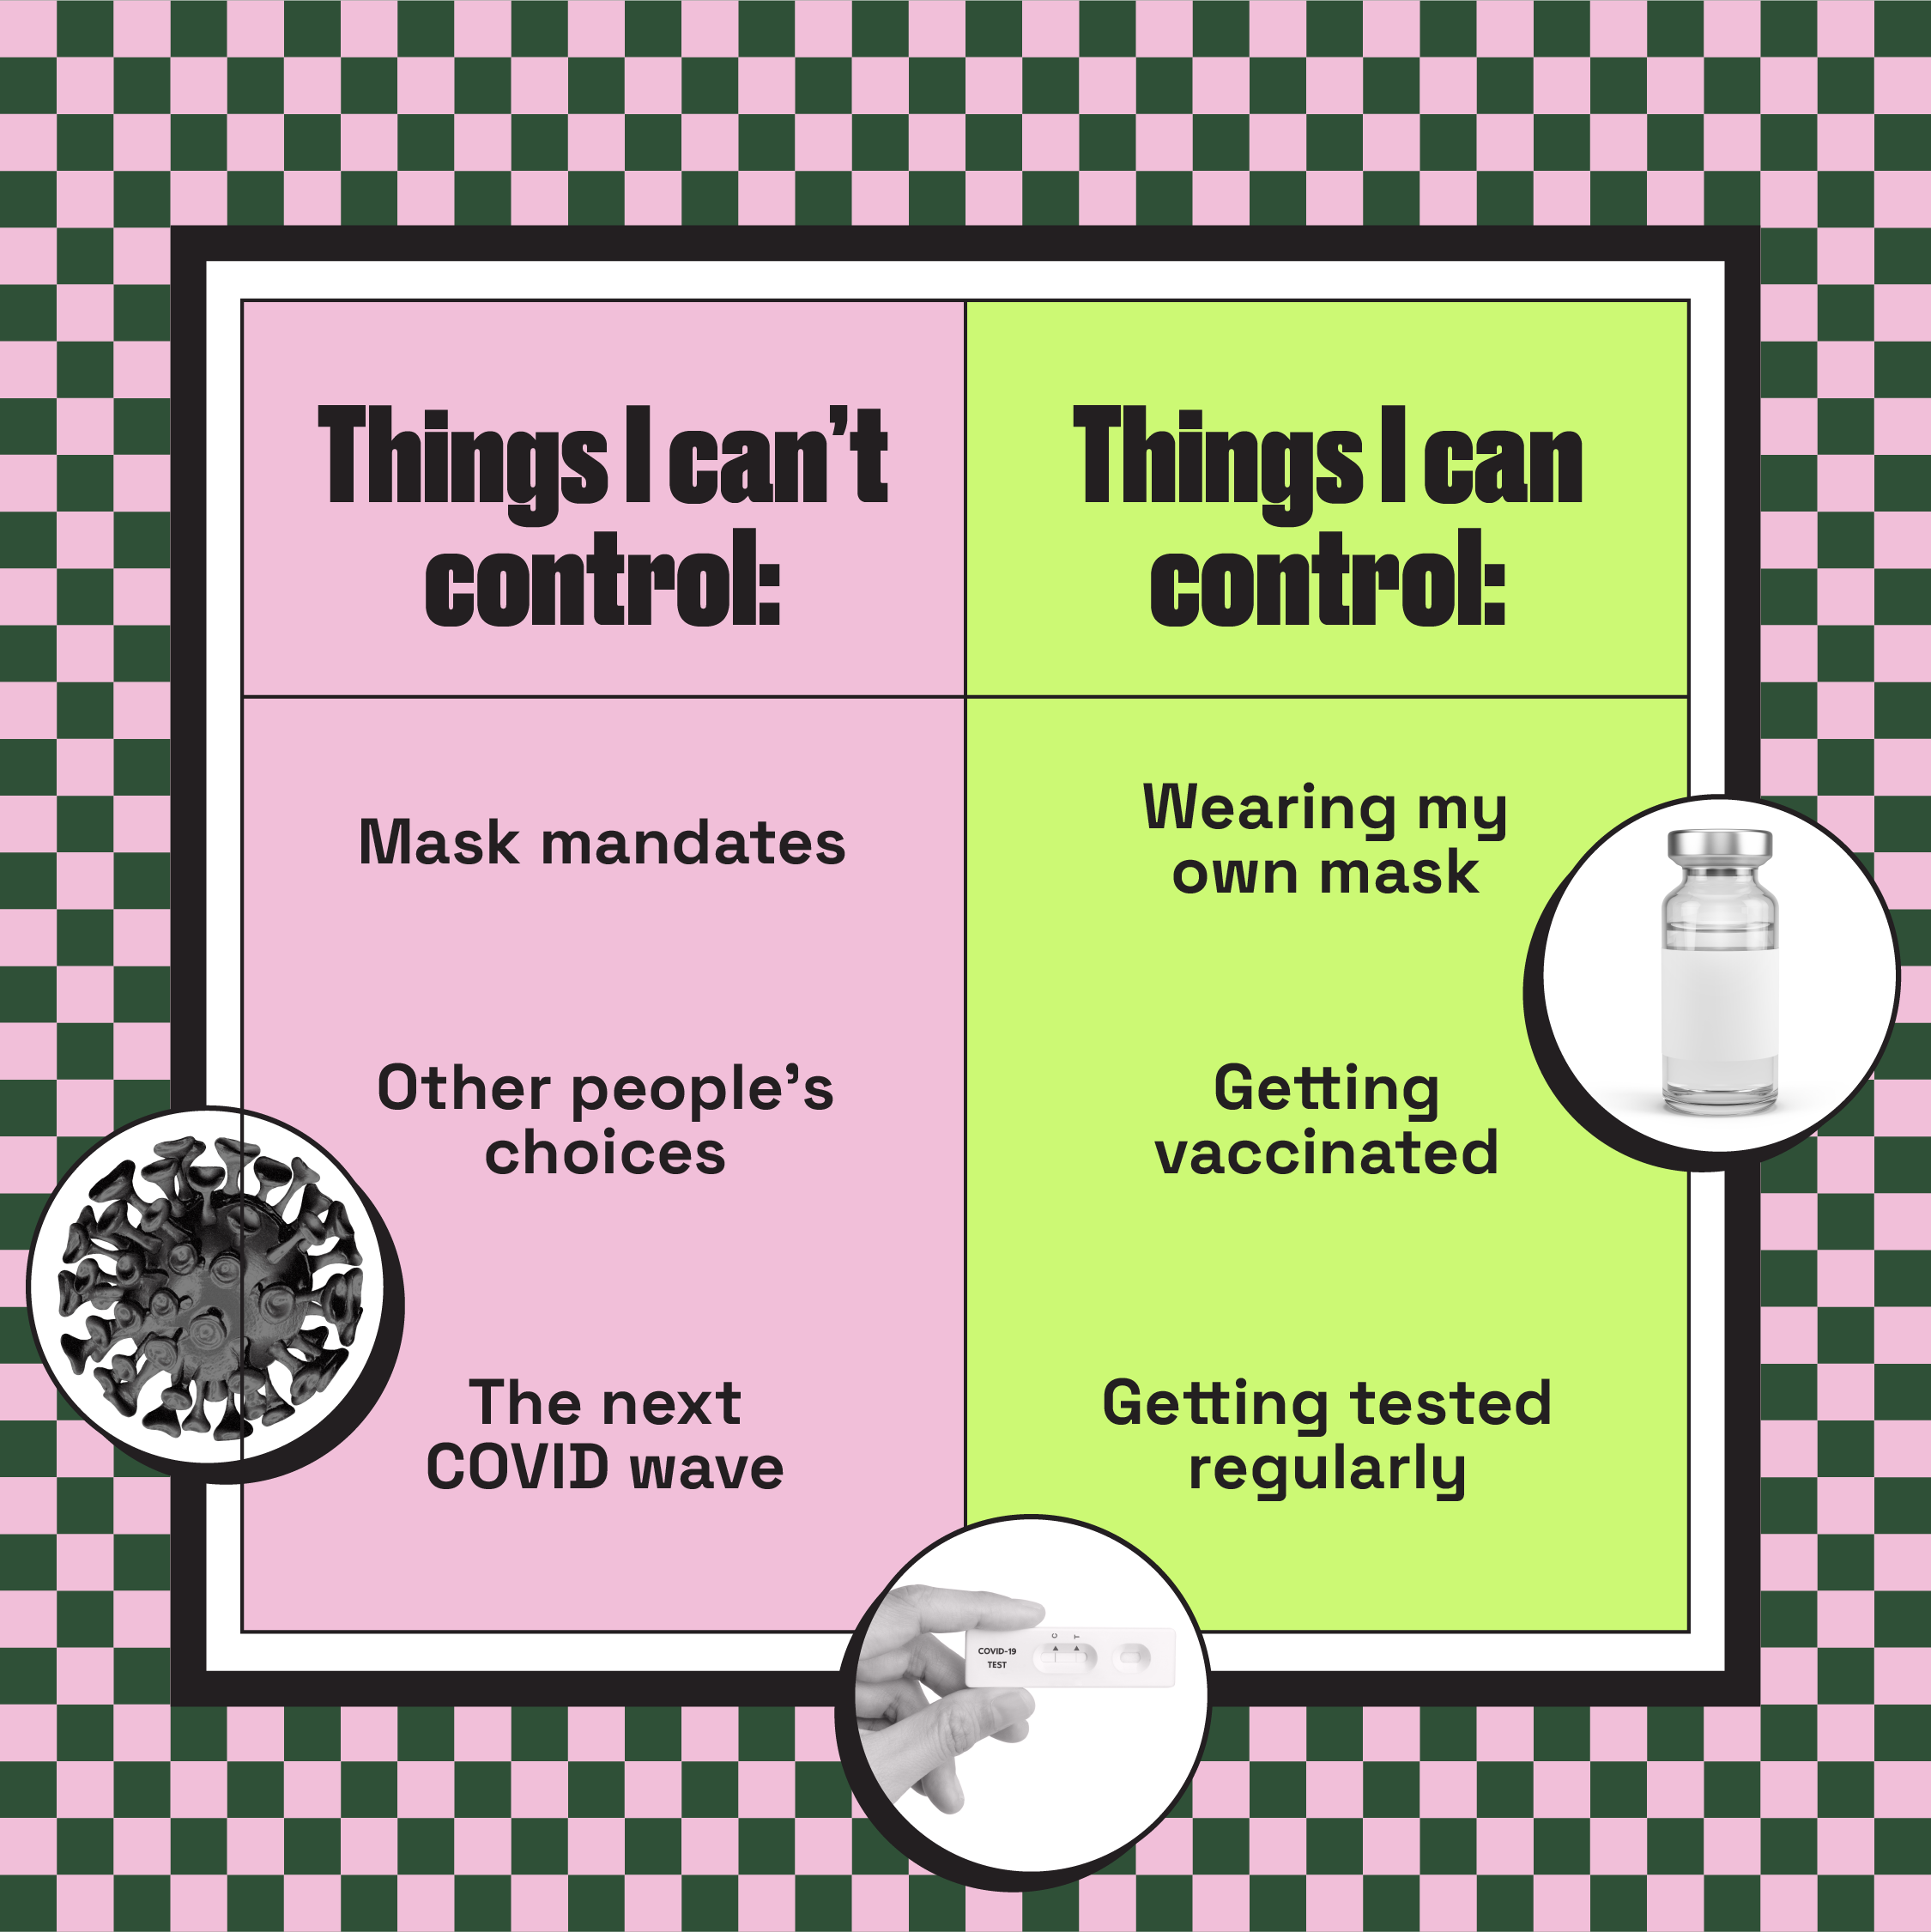 Graphic of a table with two columns. First column is pink titled as 'Things I can't control' and lists 'Mask mandates", "Other people's choices" and "The next COVID wave" under it.  The second column in neon yellow is titled "Things I can control" and lists "wearing my own mask", "Getting vaccinated" and "Getting tested regularly" under it. 